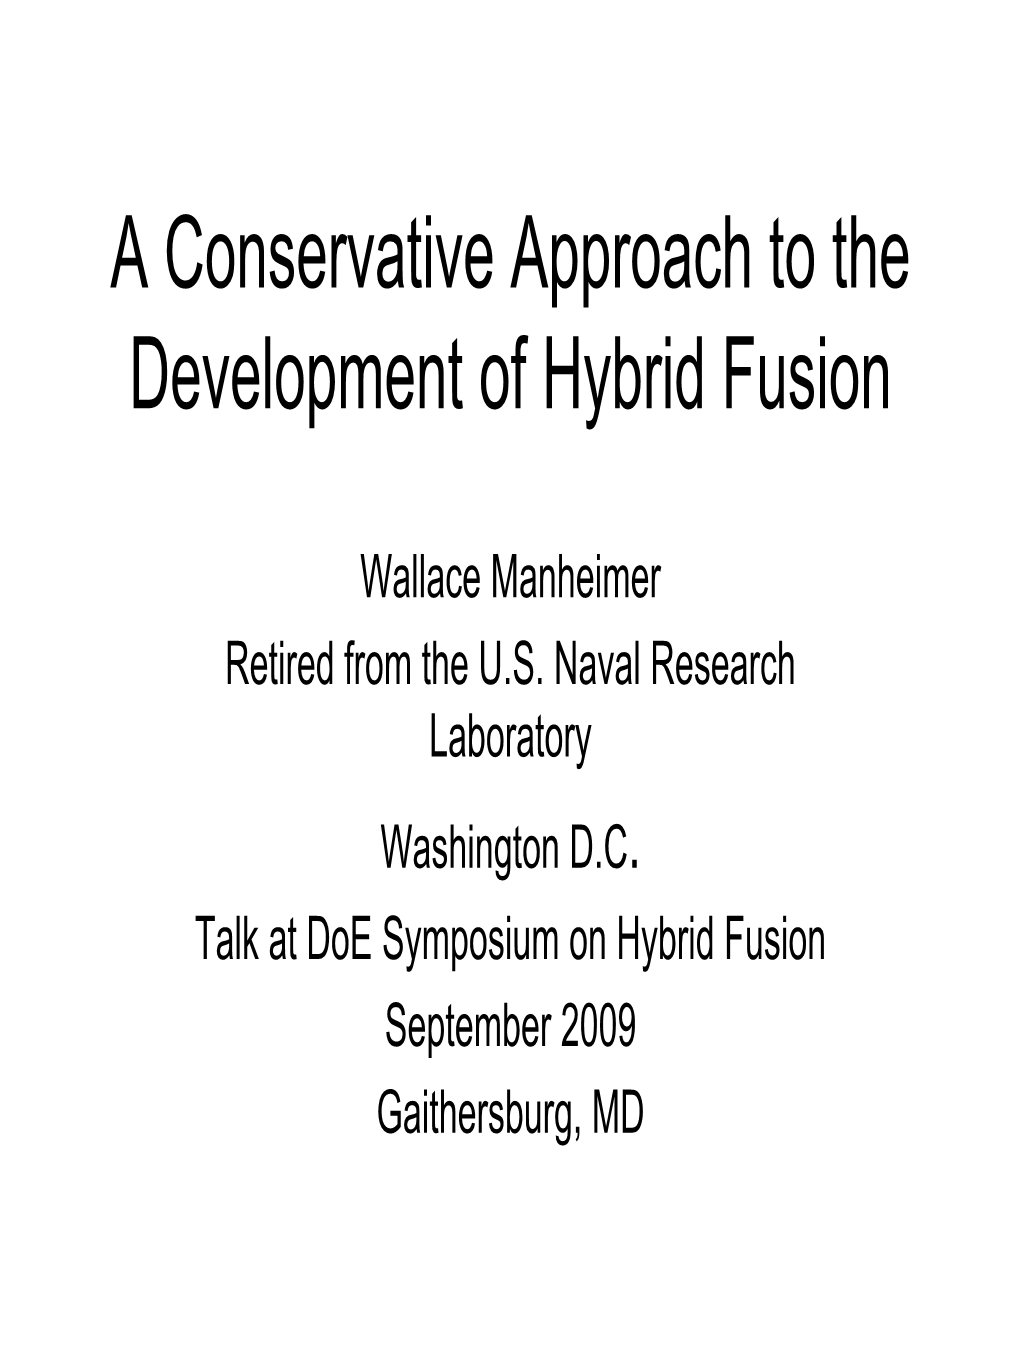 A Conservative Approach to the Development of Hybrid Fusion